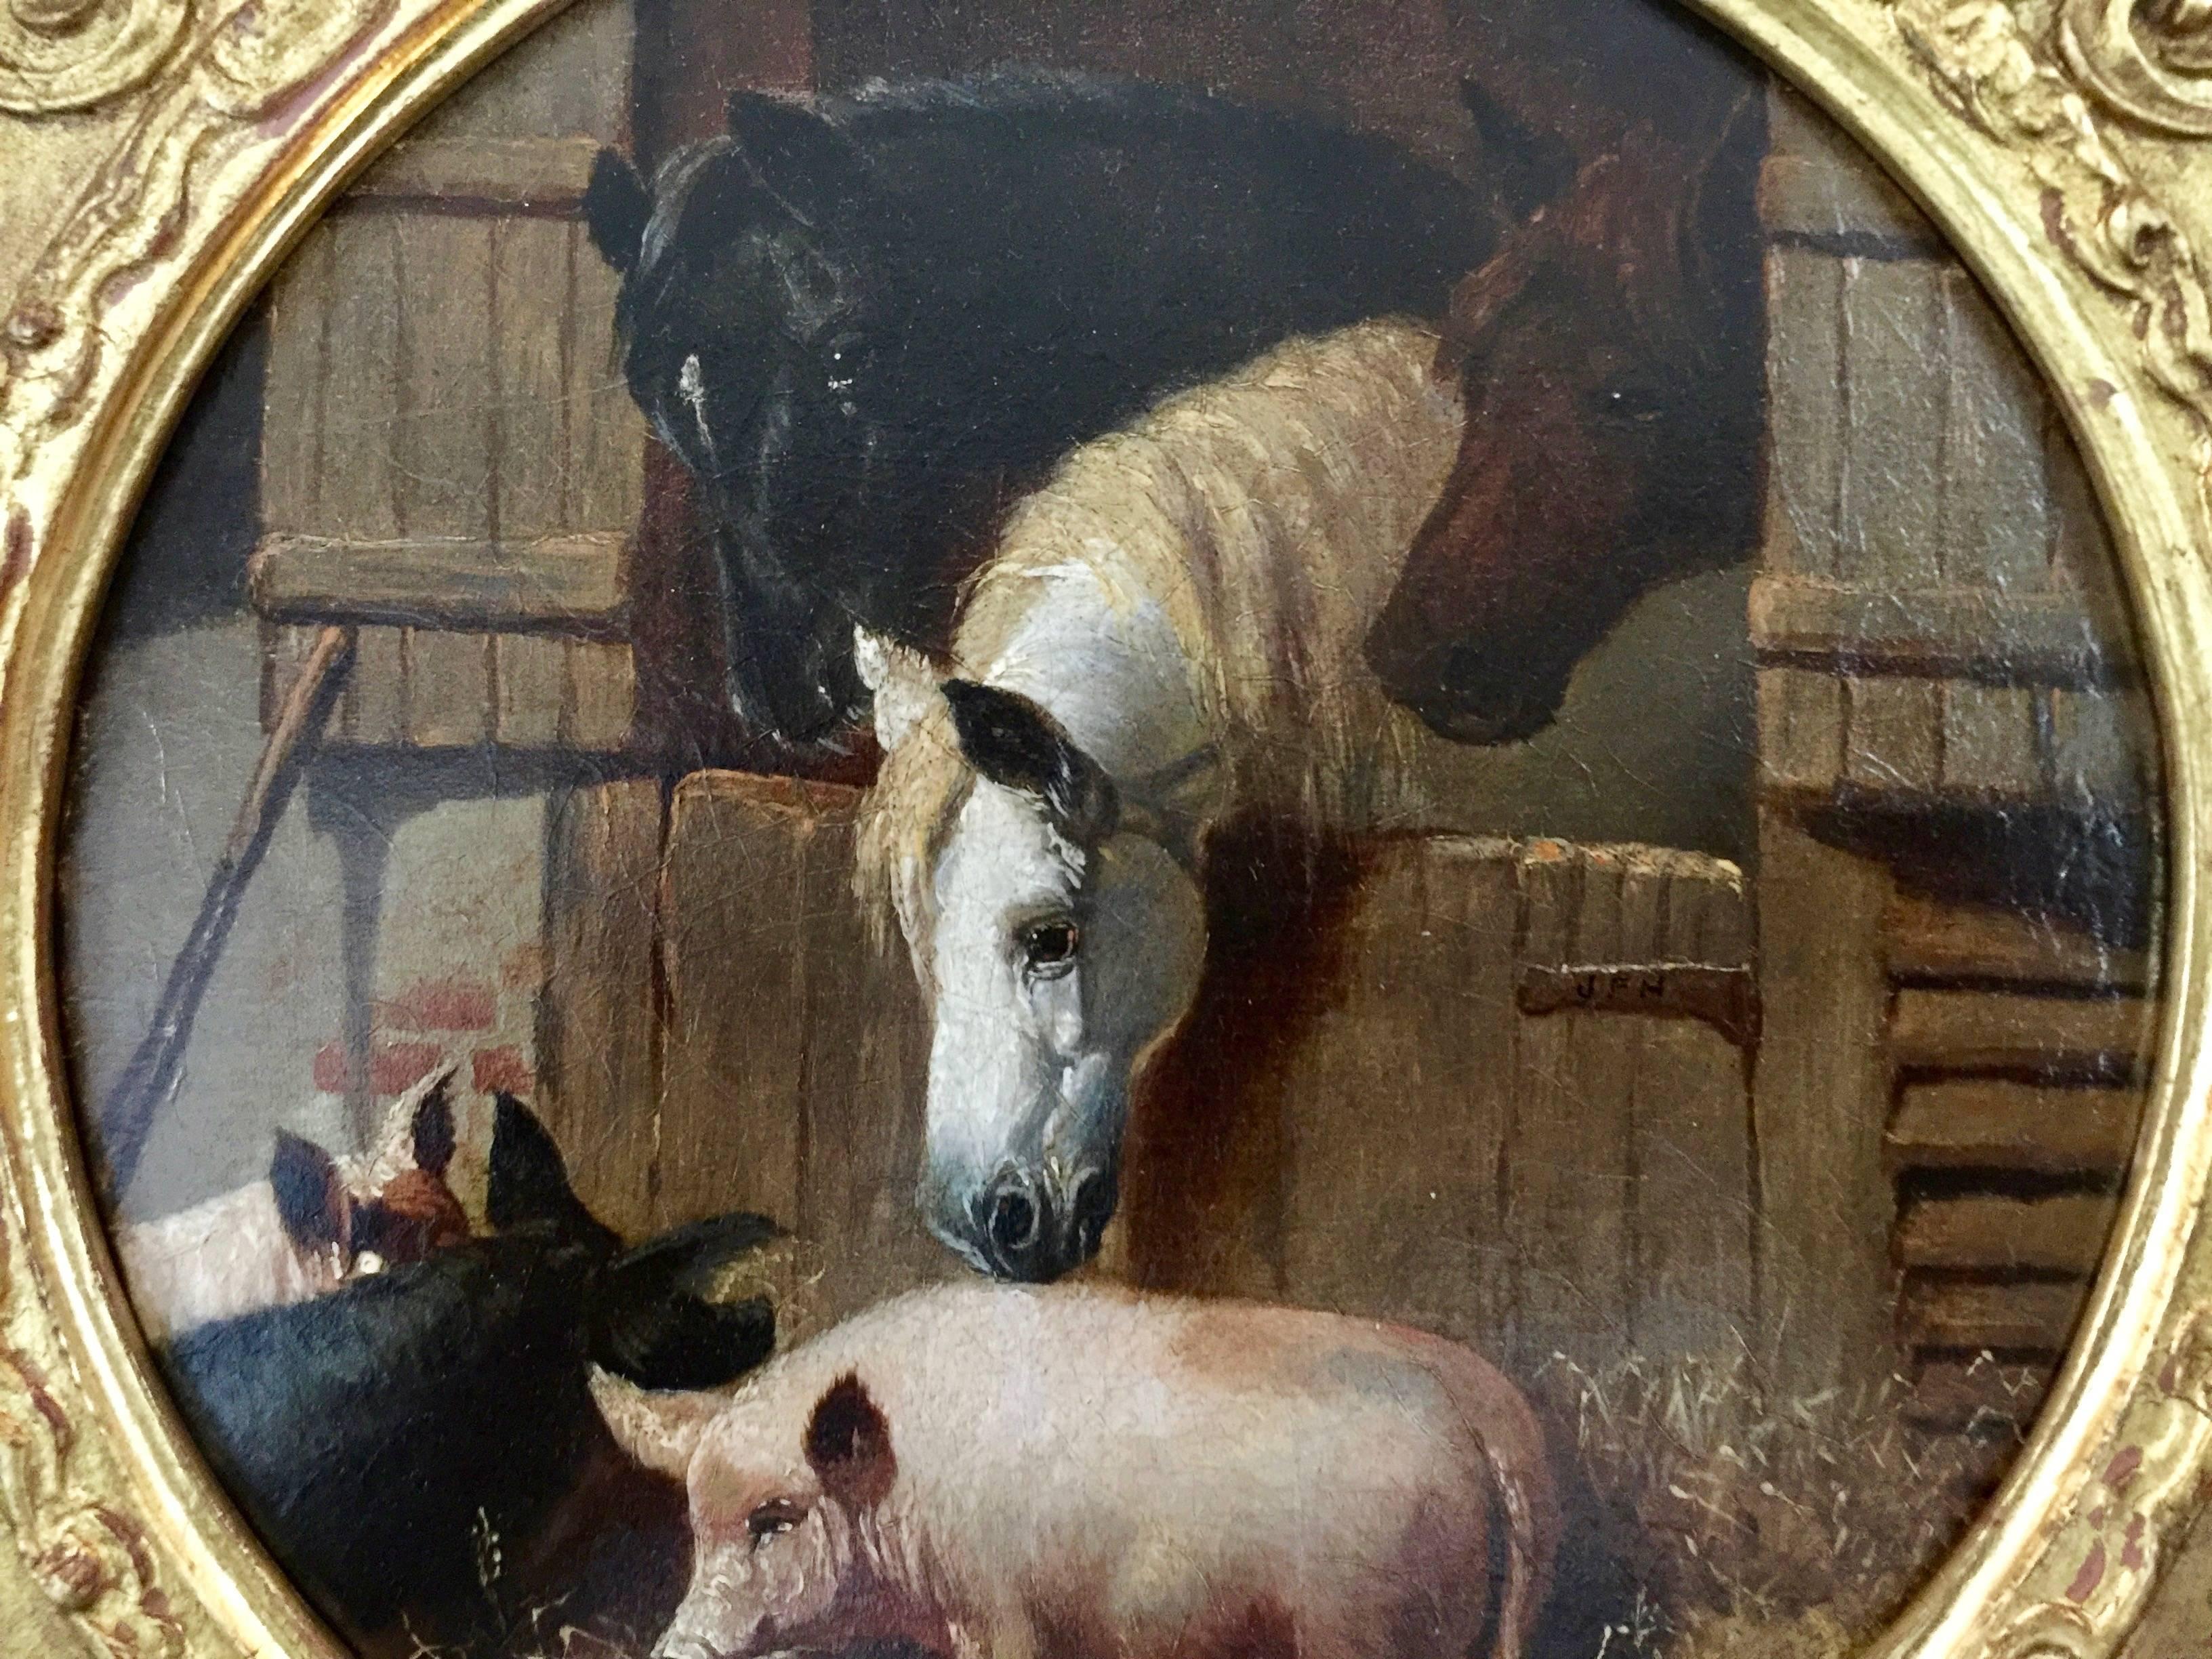 Pigs and horses in an English stable barn yard - Painting by John Frederick Herring Jr.